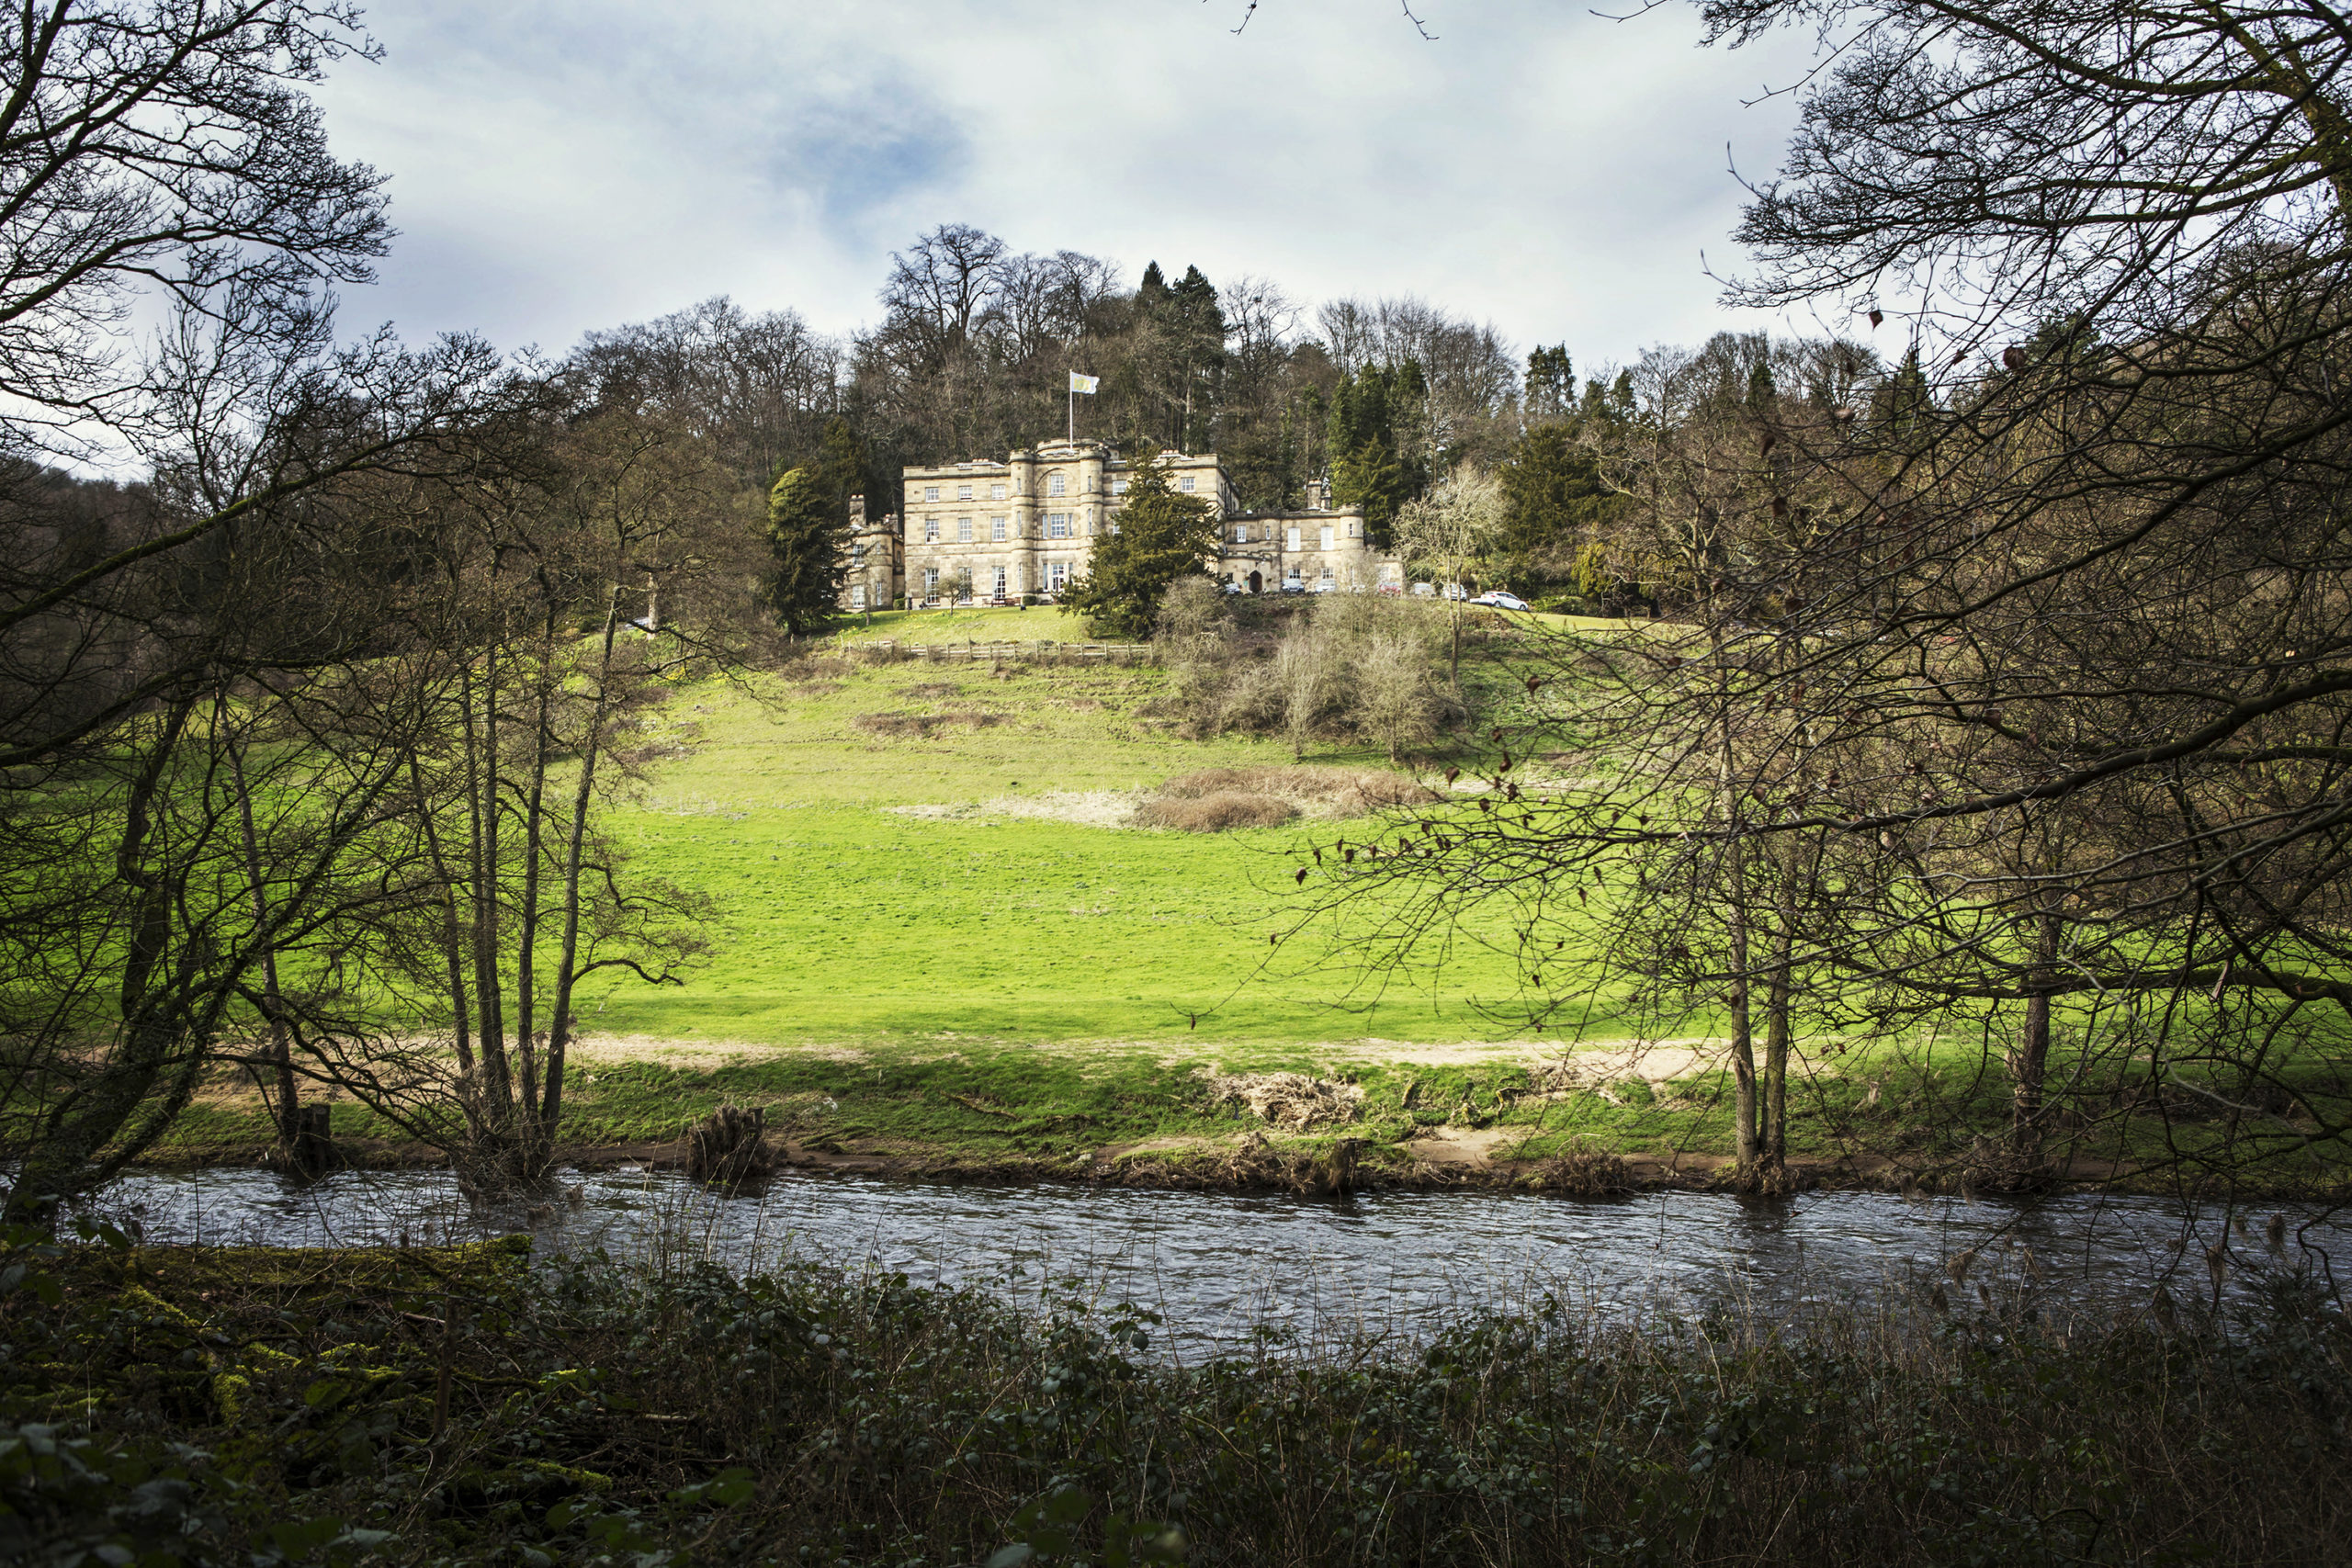 Recent research: Willersley Castle